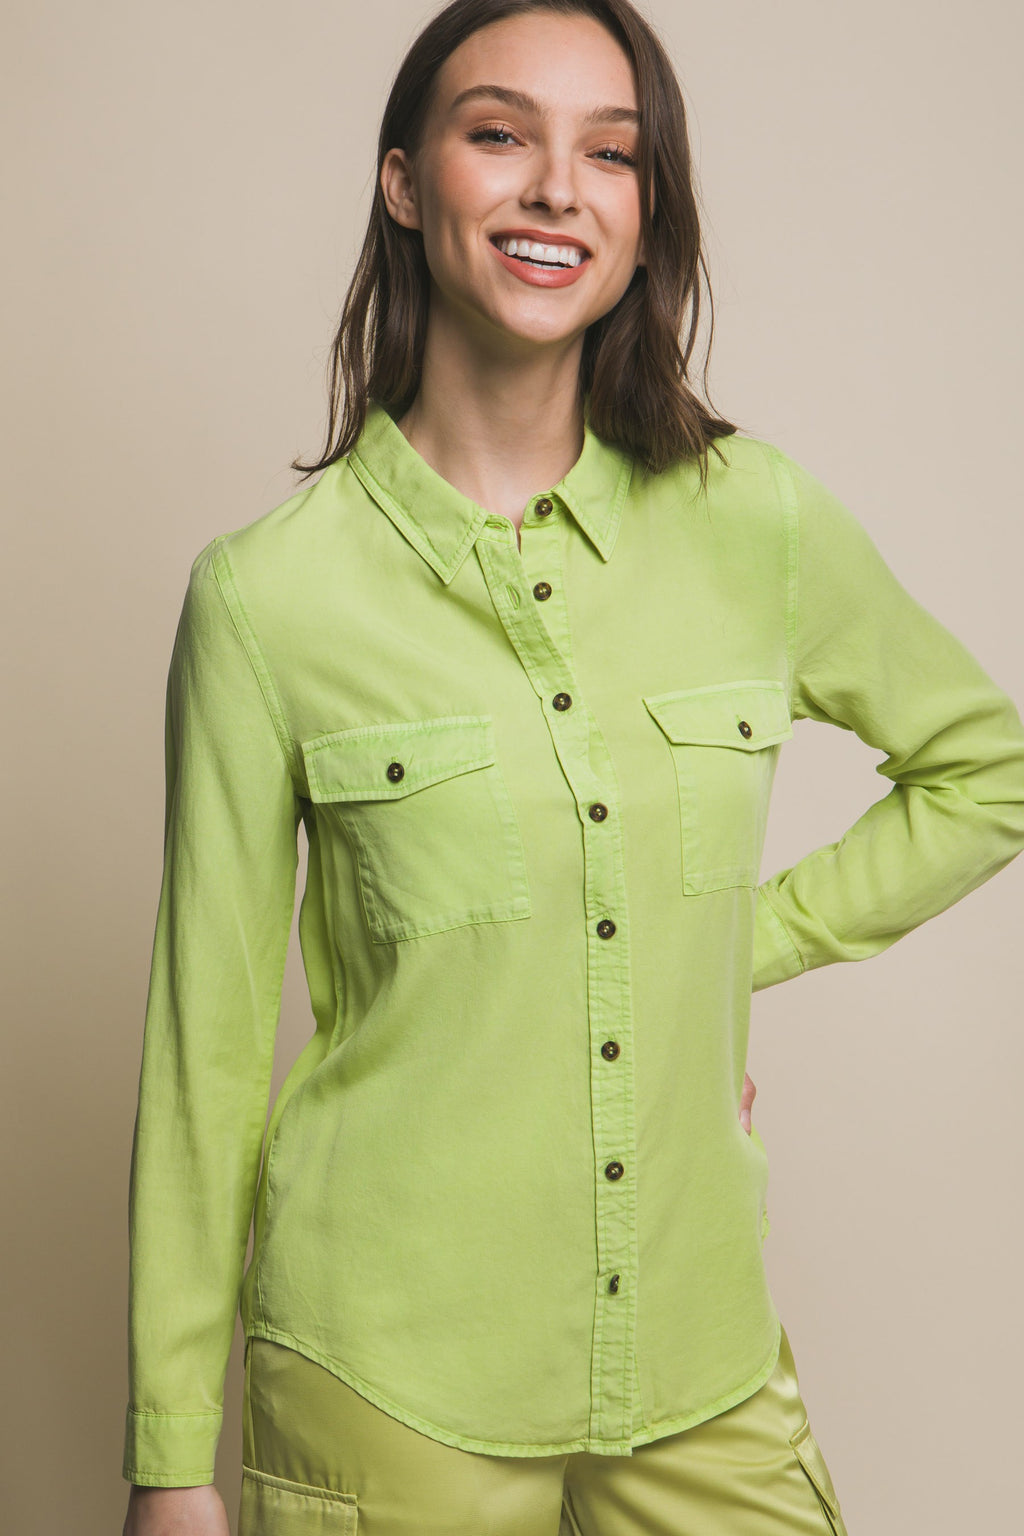 / Dish It Up Scoop Neck Lime Button Down Shirt - Catching Fireflies Boutique